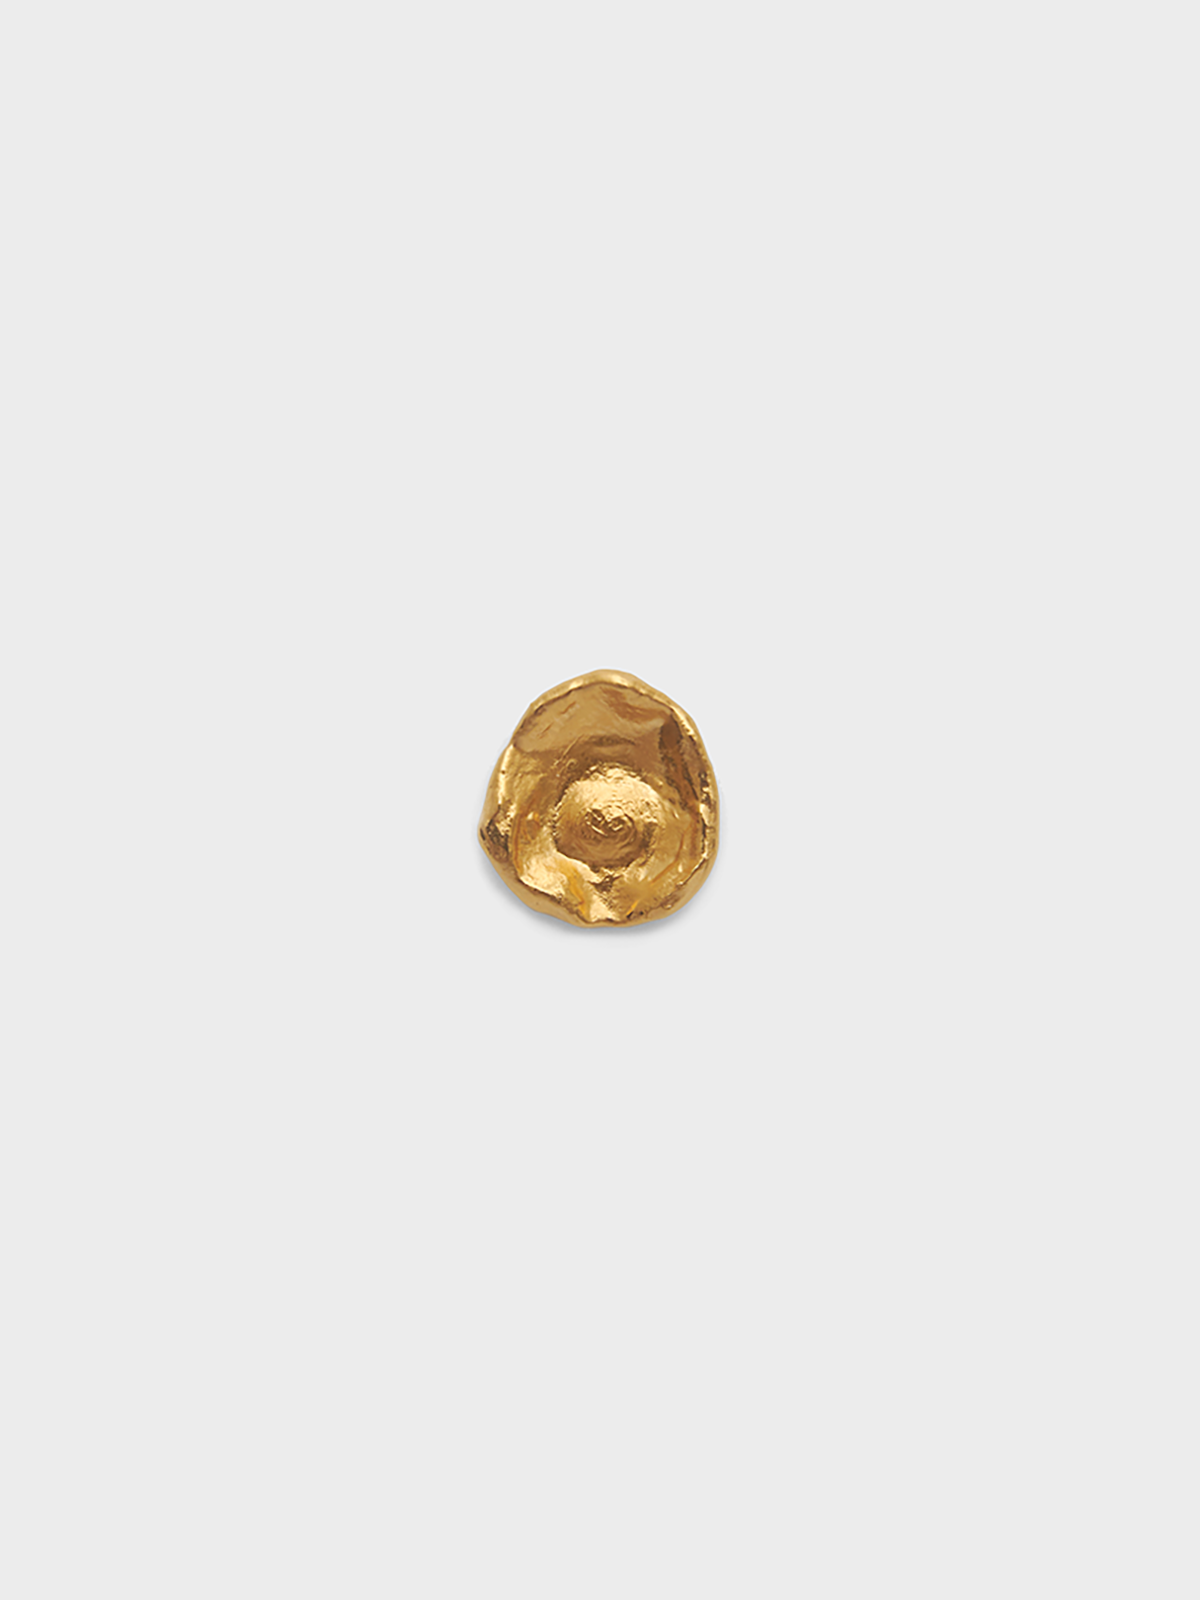 Lea Hoyer - Clam Earring with Gold Plating